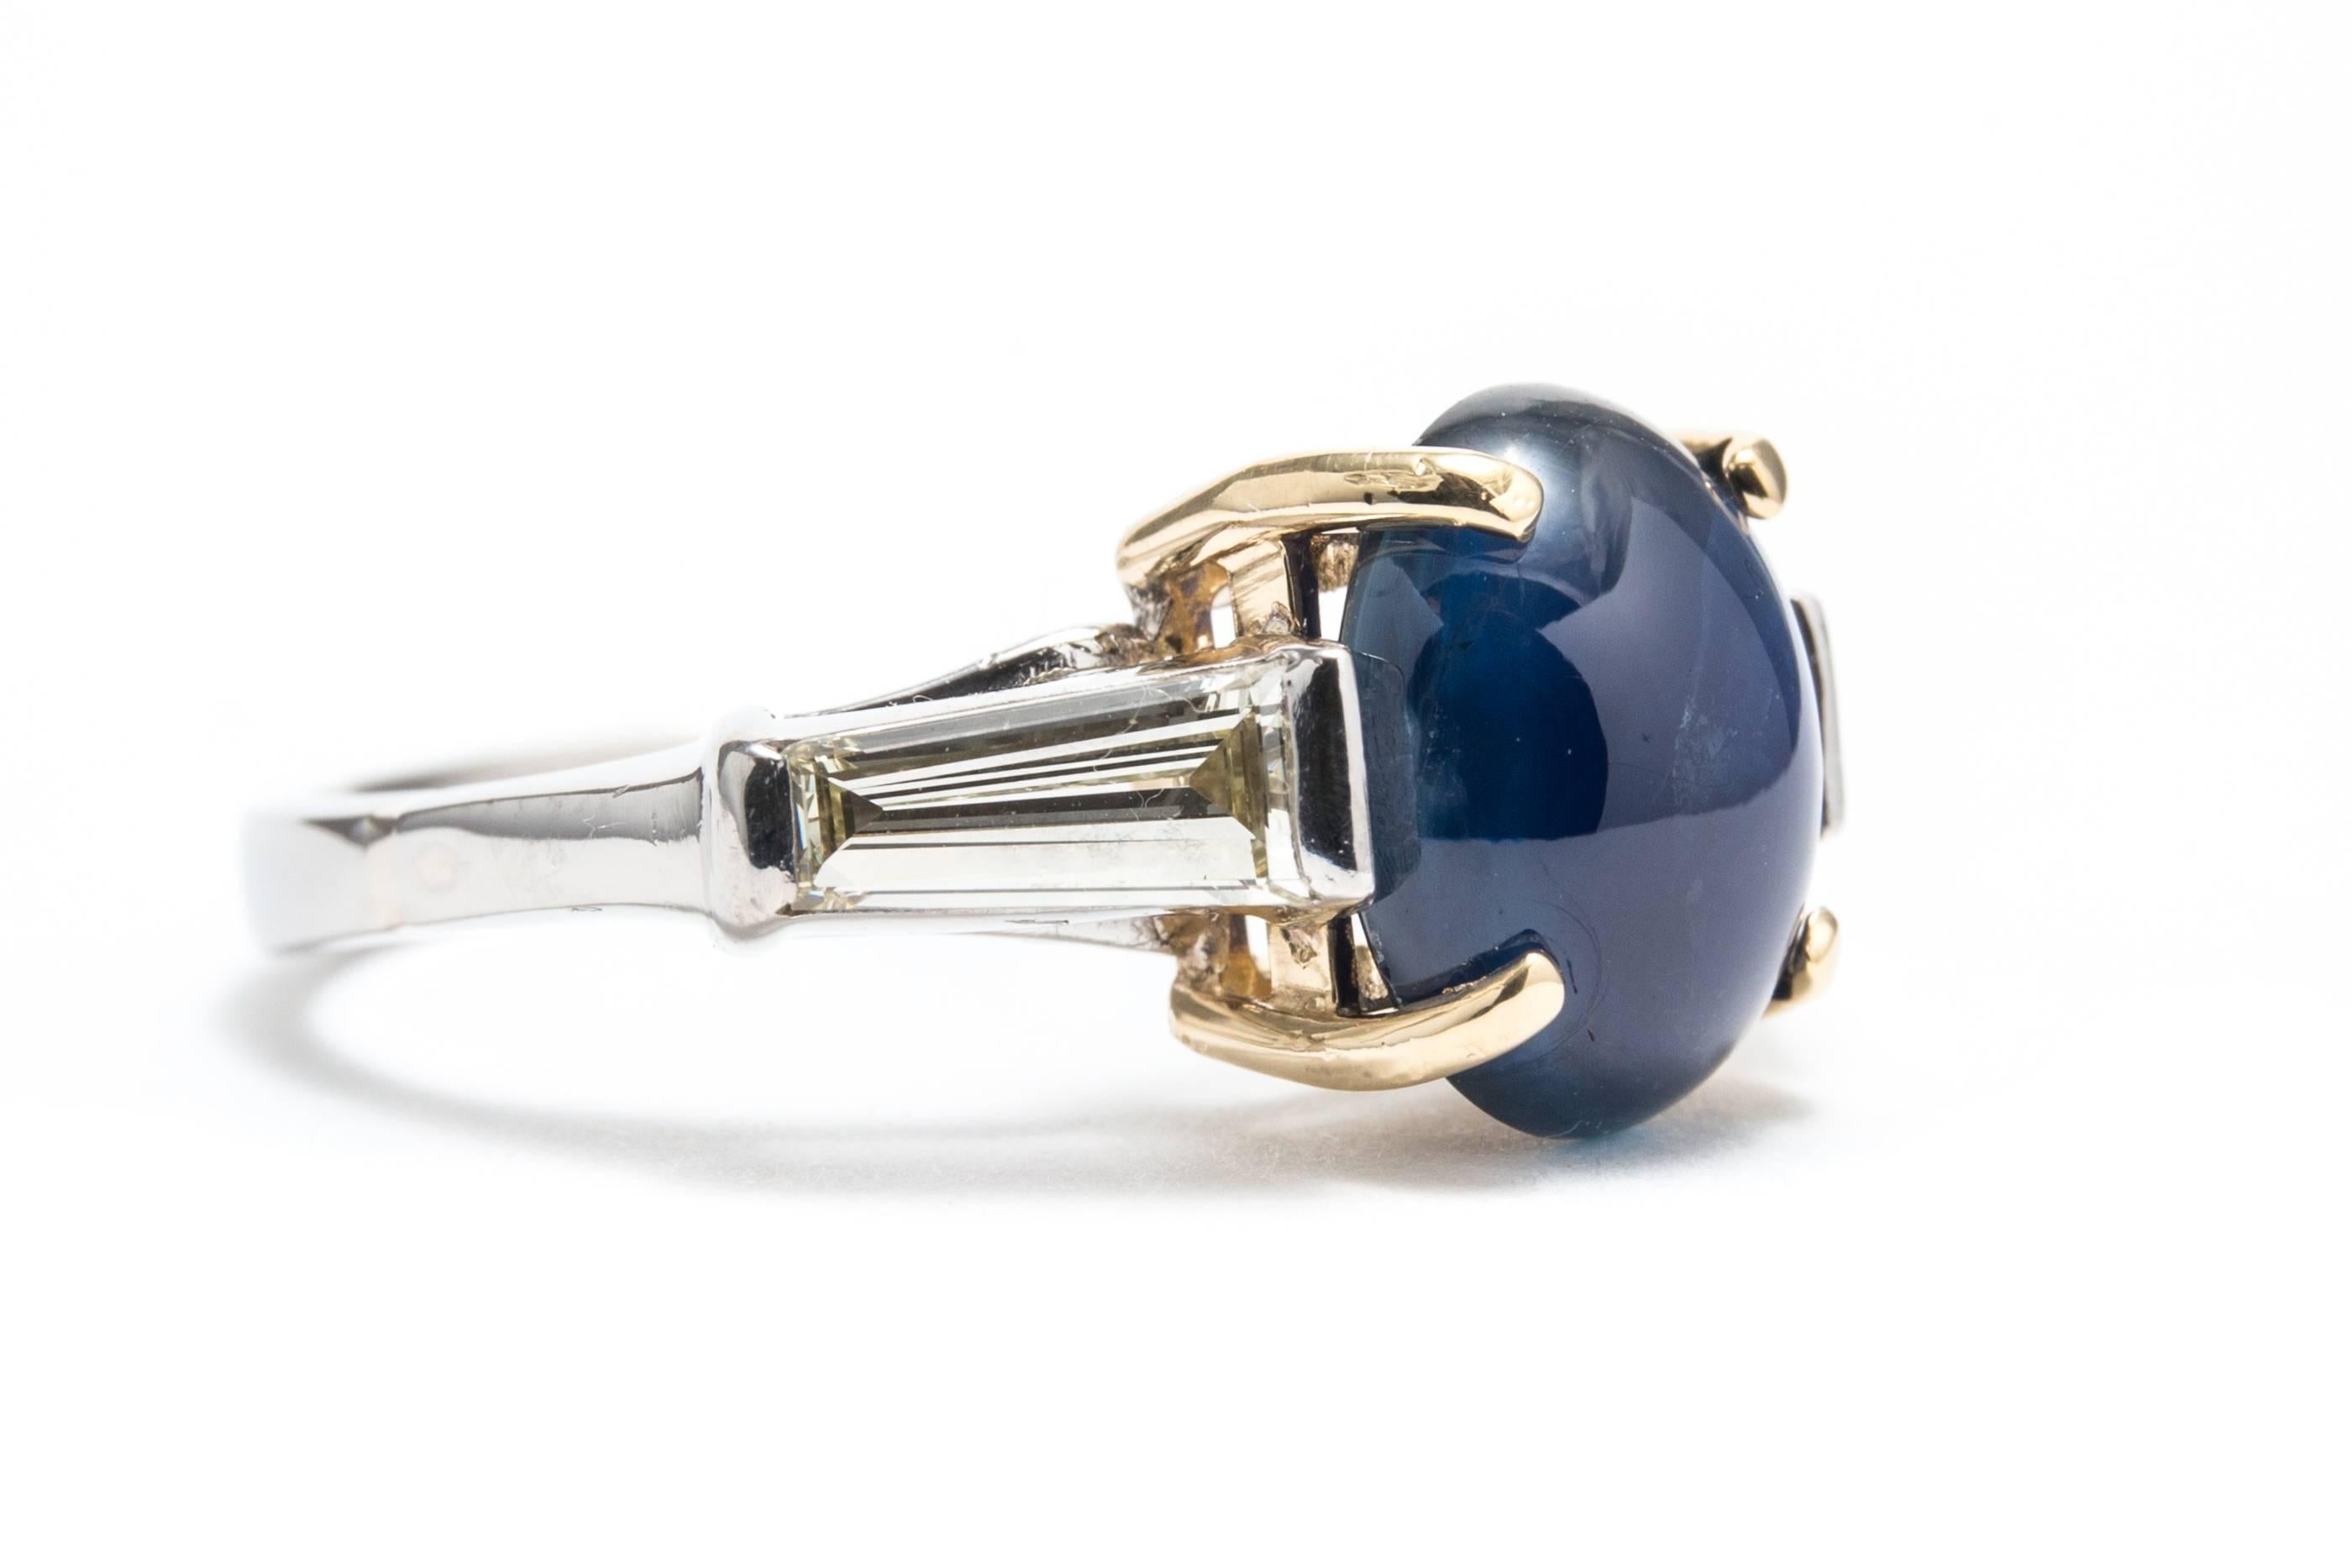 A beautiful sapphire, and baguette diamond ring in luxurious platinum and 18 karat yellow gold.  Centered by a rich vivid blue cabochon sapphire, this ring also features a pair of sparkling tapered baguette cut diamonds framing the